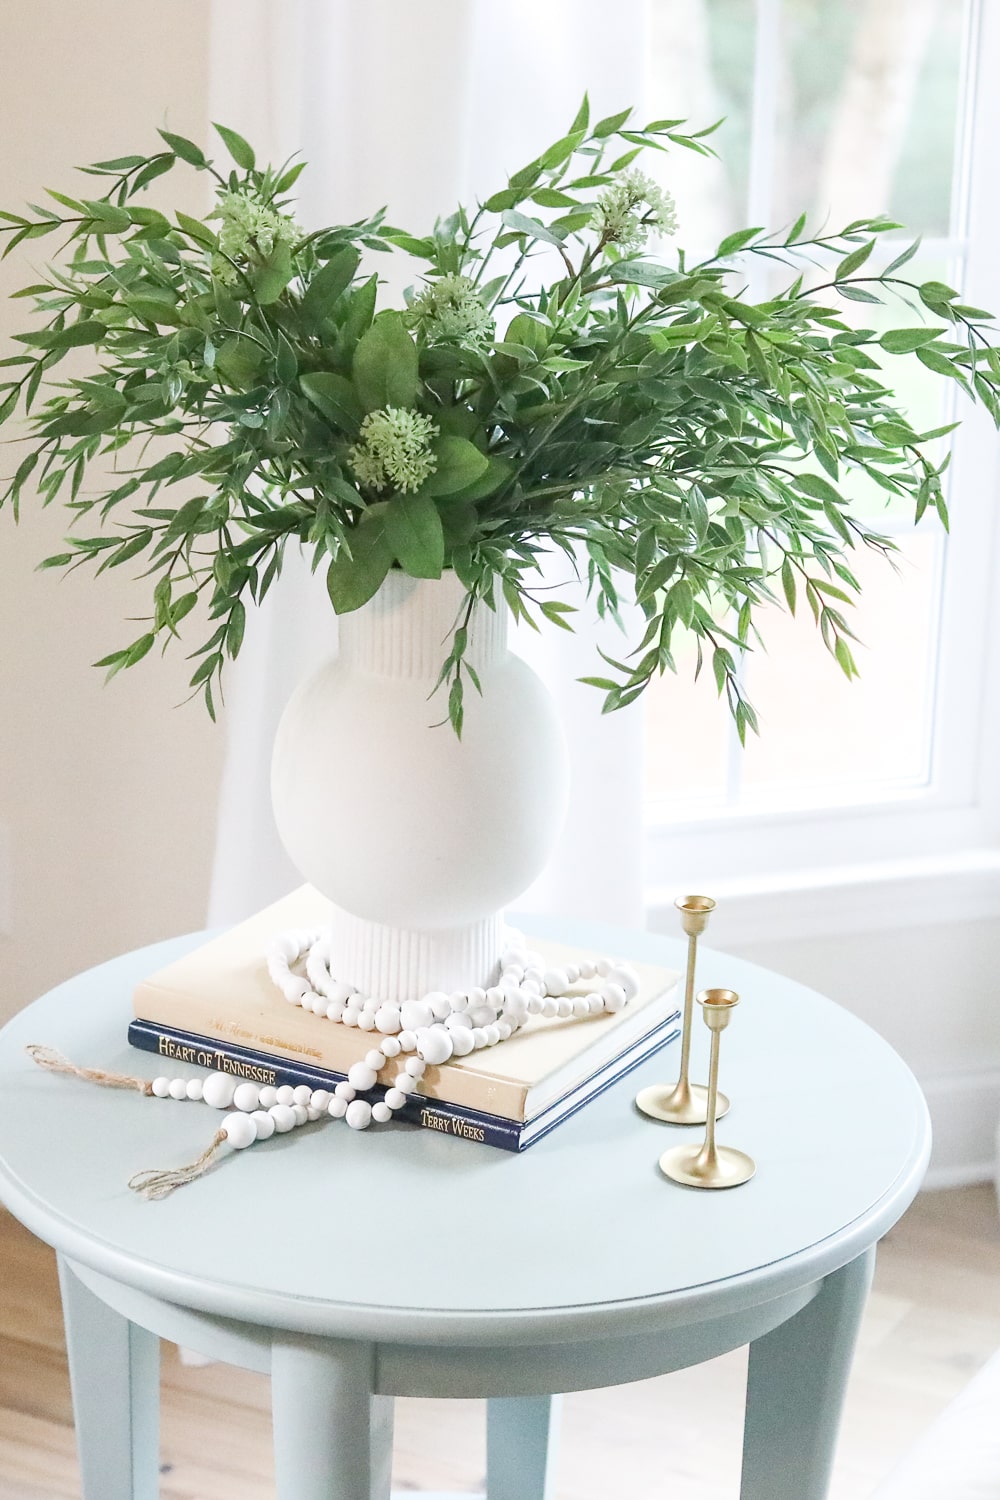 styling an end table with books, candle ticks, and a vase